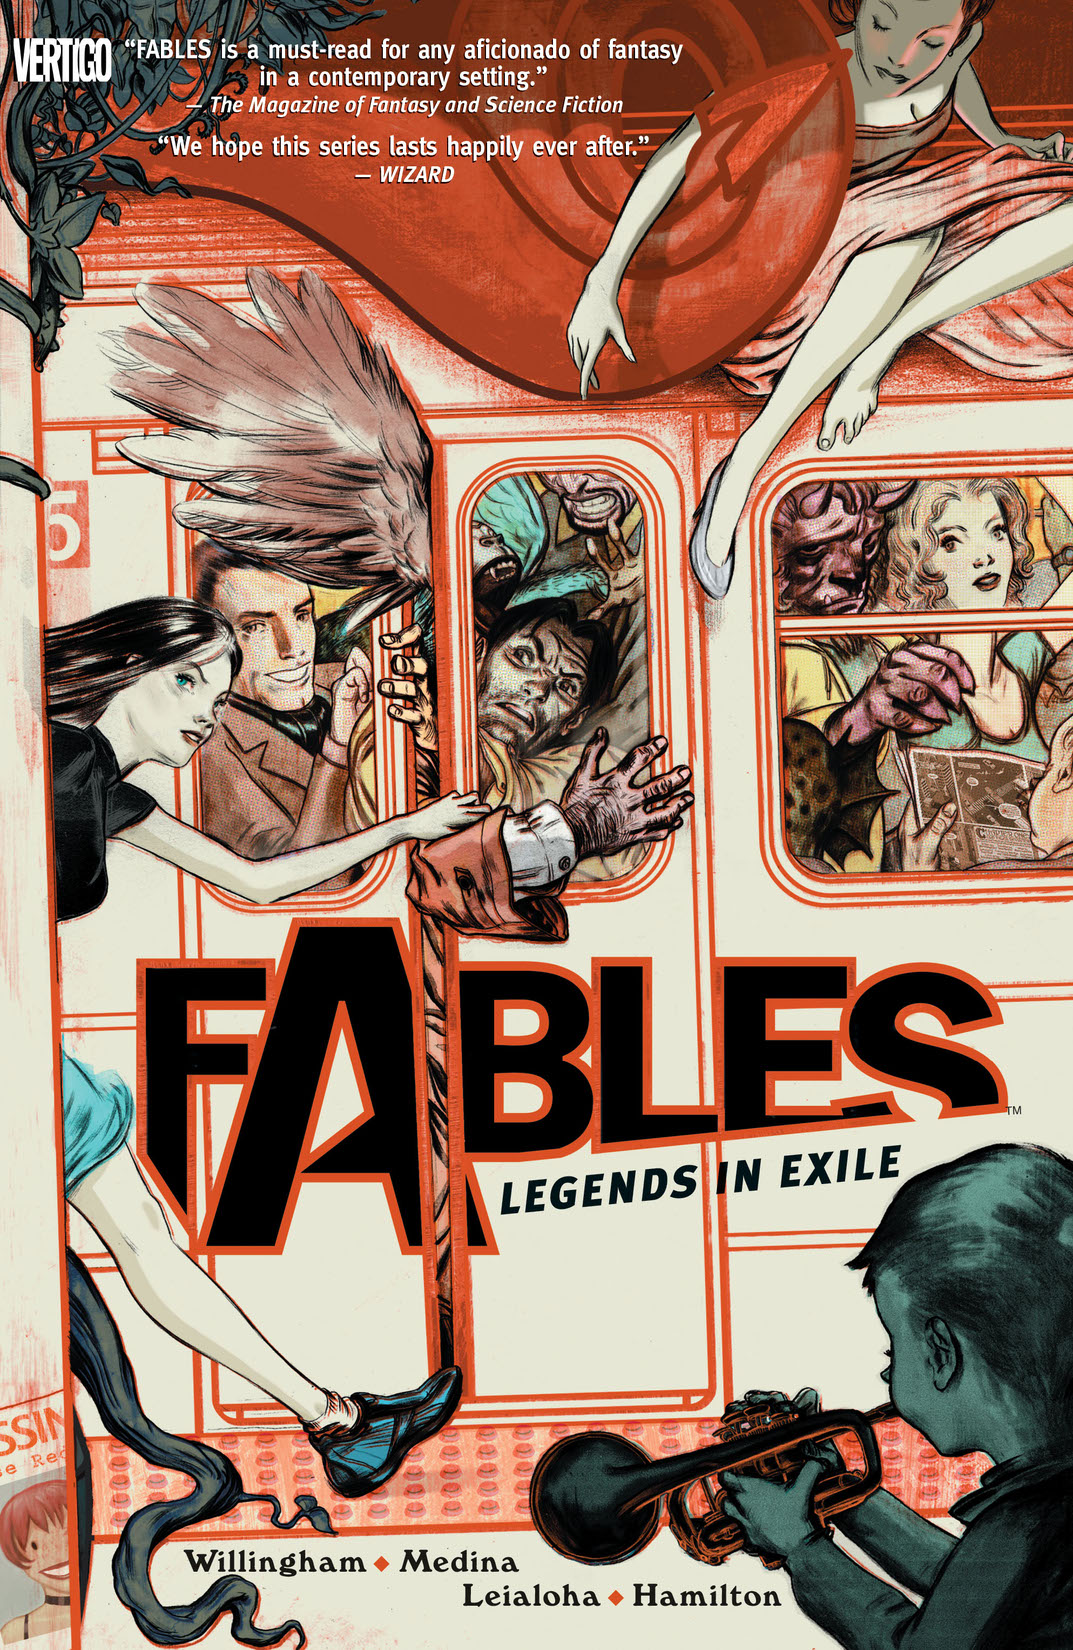 Fables Vol. 1: Legends in Exile preview images